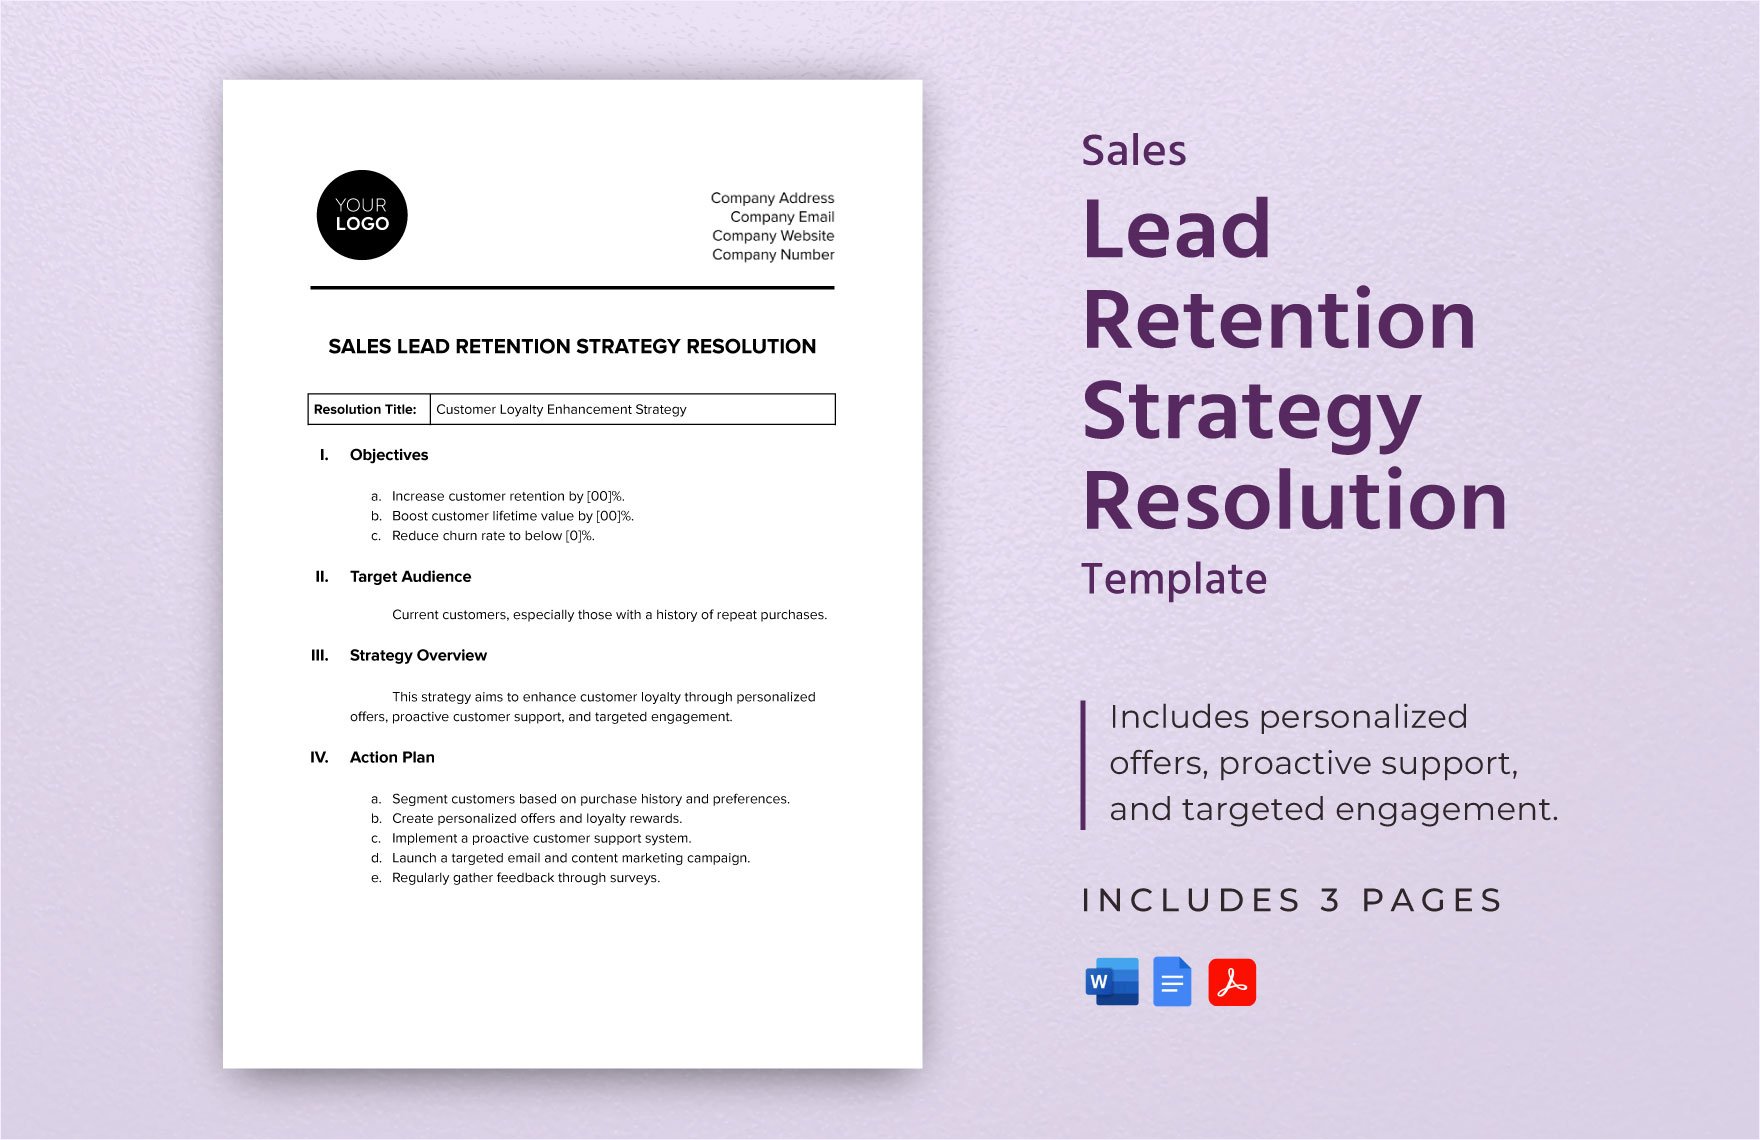 Sales Lead Retention Strategy Resolution Template